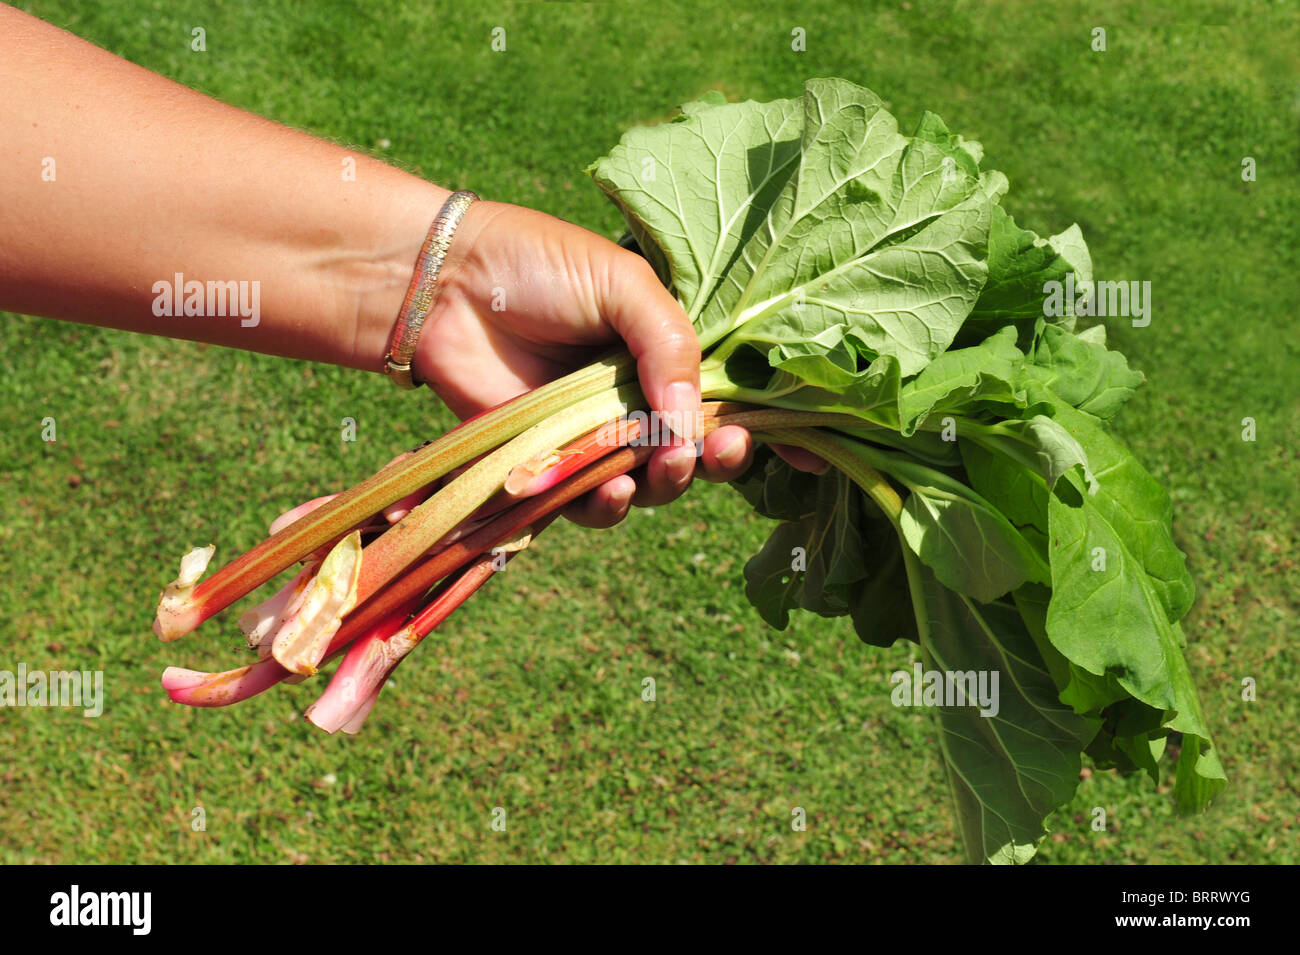 Gardeners hand holding freshly picked rhubarb from the garden Stock Photo